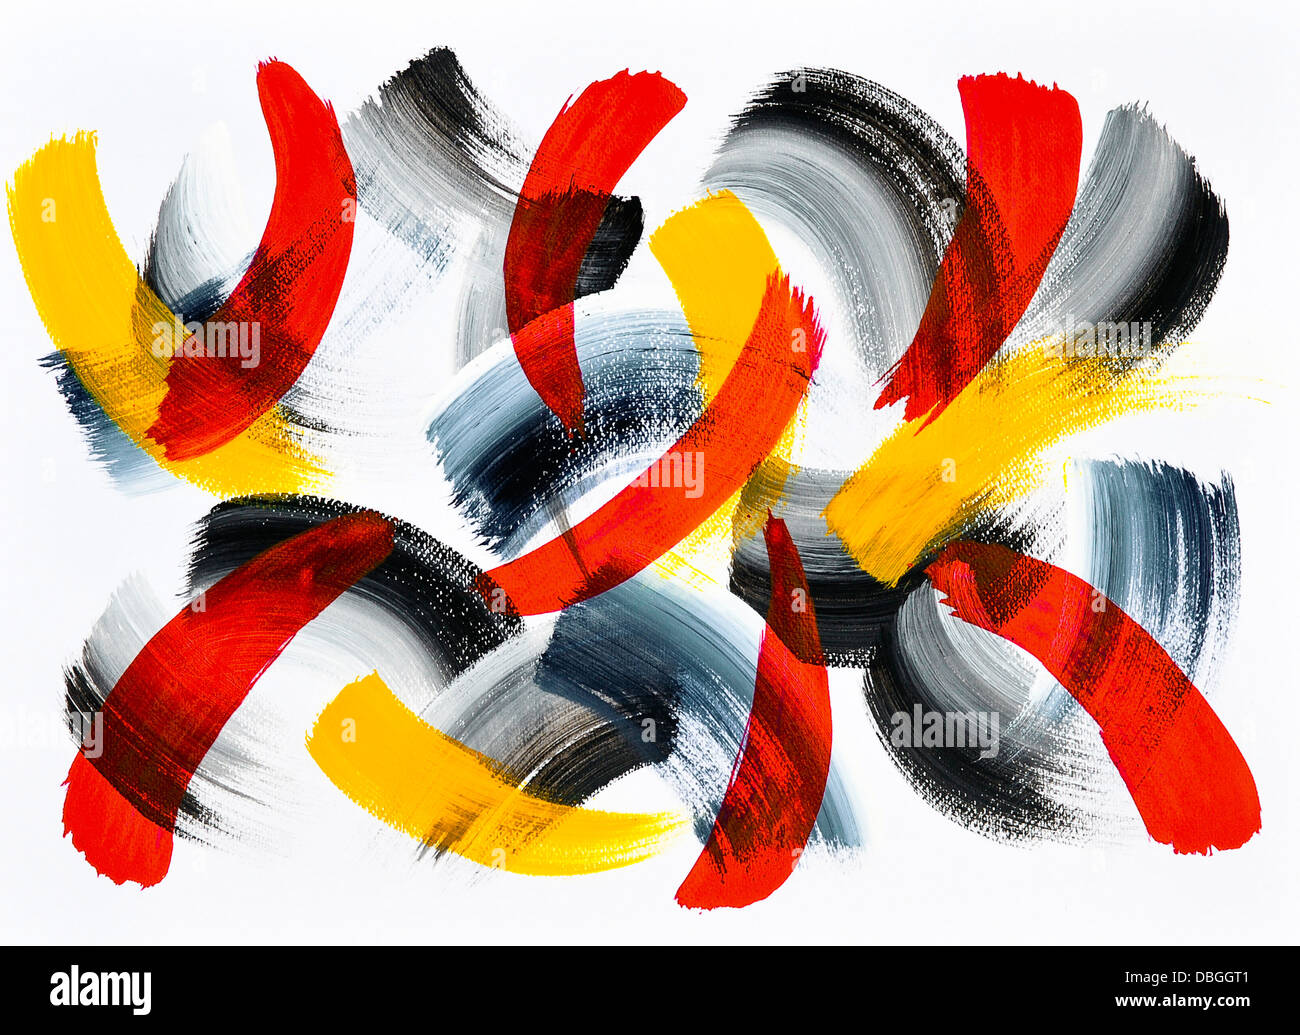 Abstract acrylic painting on paper. Stock Photo